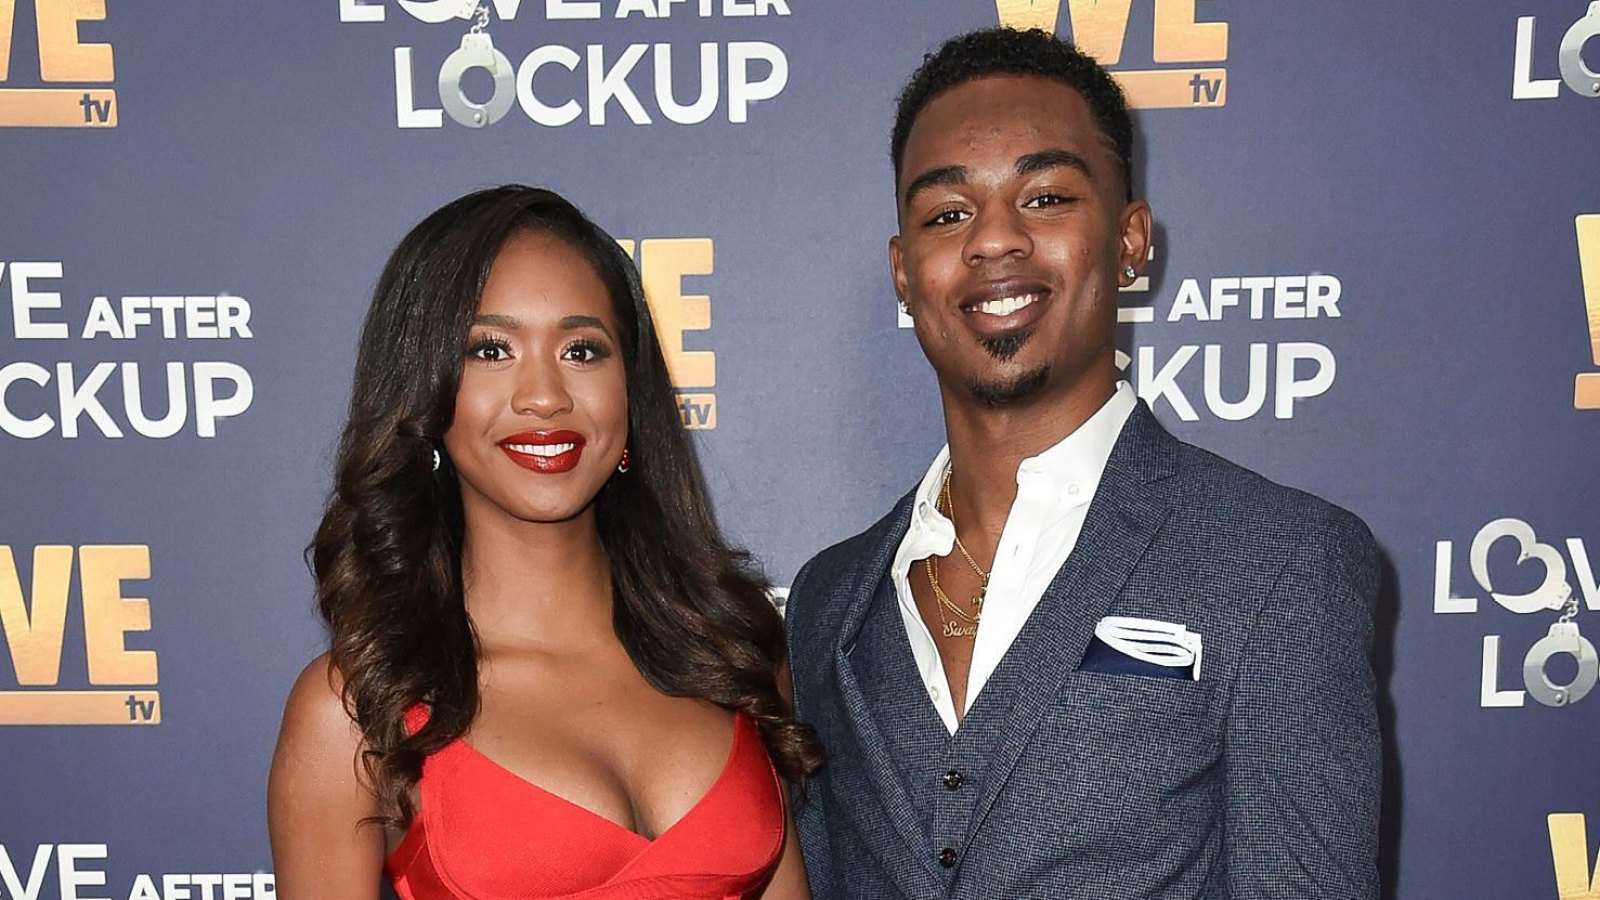 Big Brother’s Bayleigh Dayton Is Pregnant, Expecting 1st Child With Chris ‘Swaggy C’ Williams Following 2018 Show Miscarriage